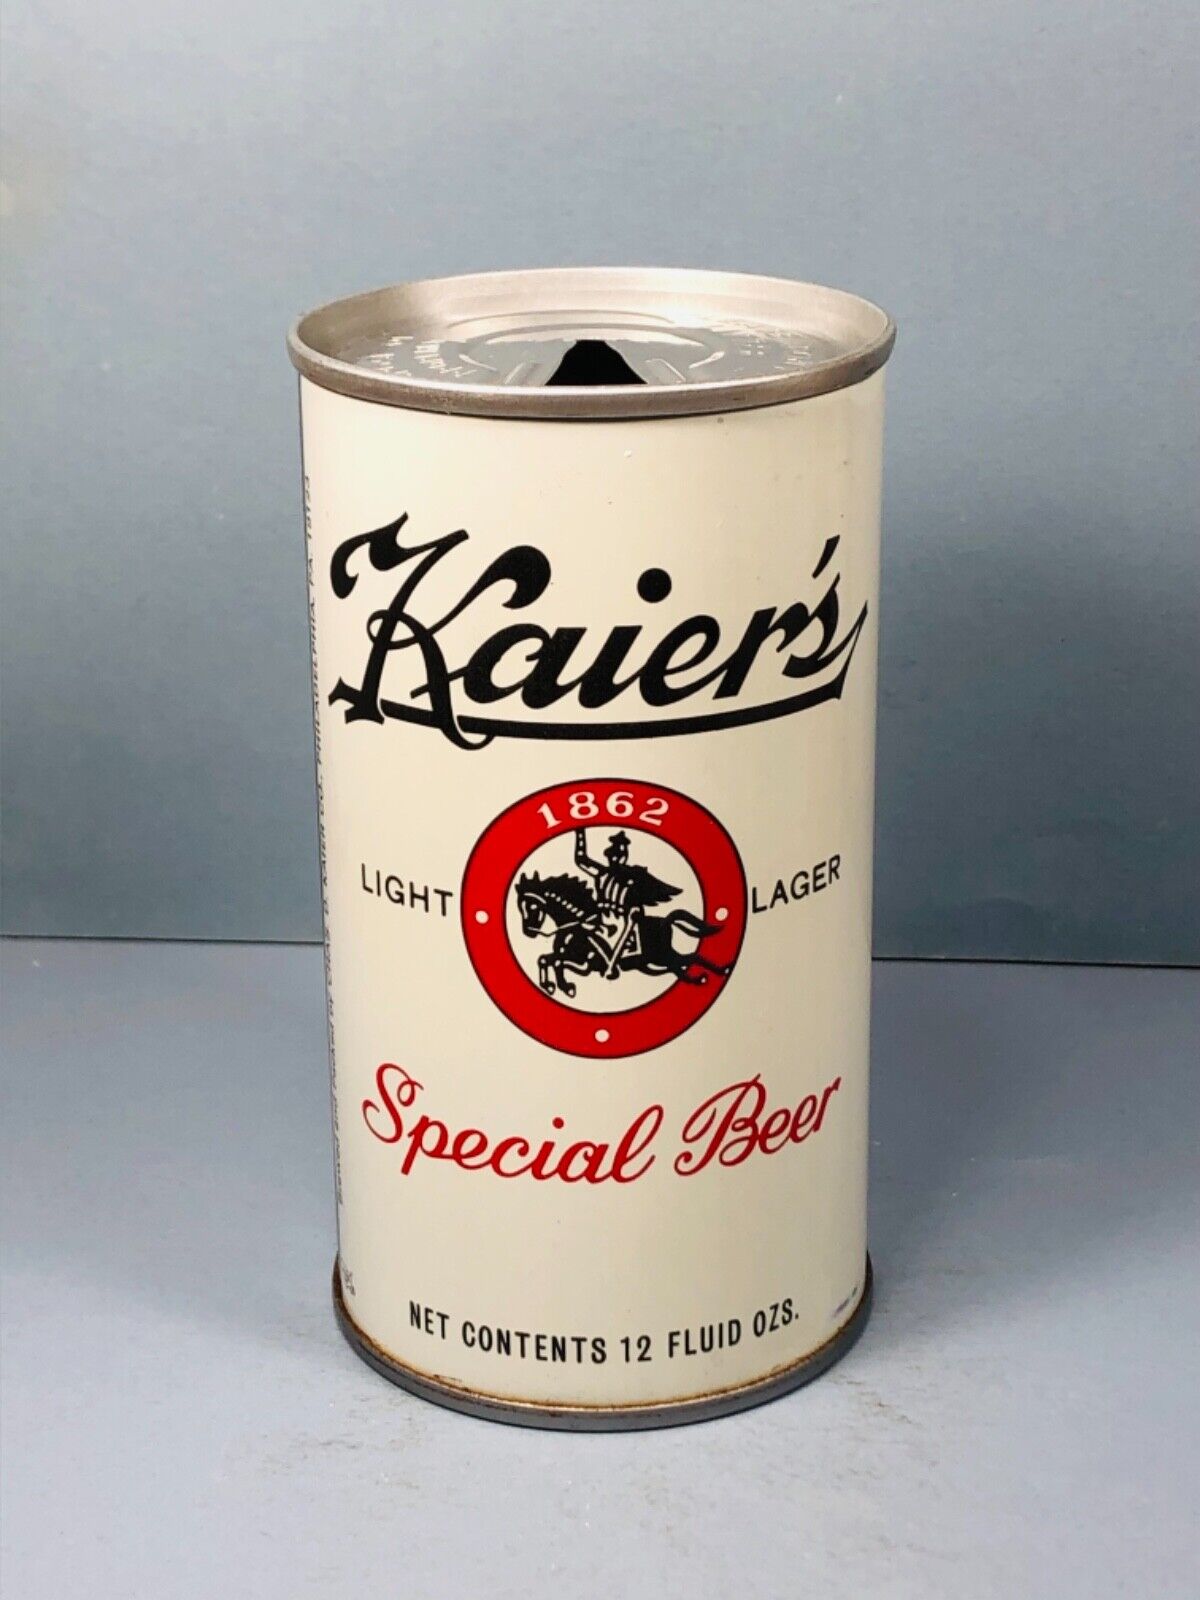 Kaier’s Light Lager Special Beer Wide Seam Philadelphia, Pa. 